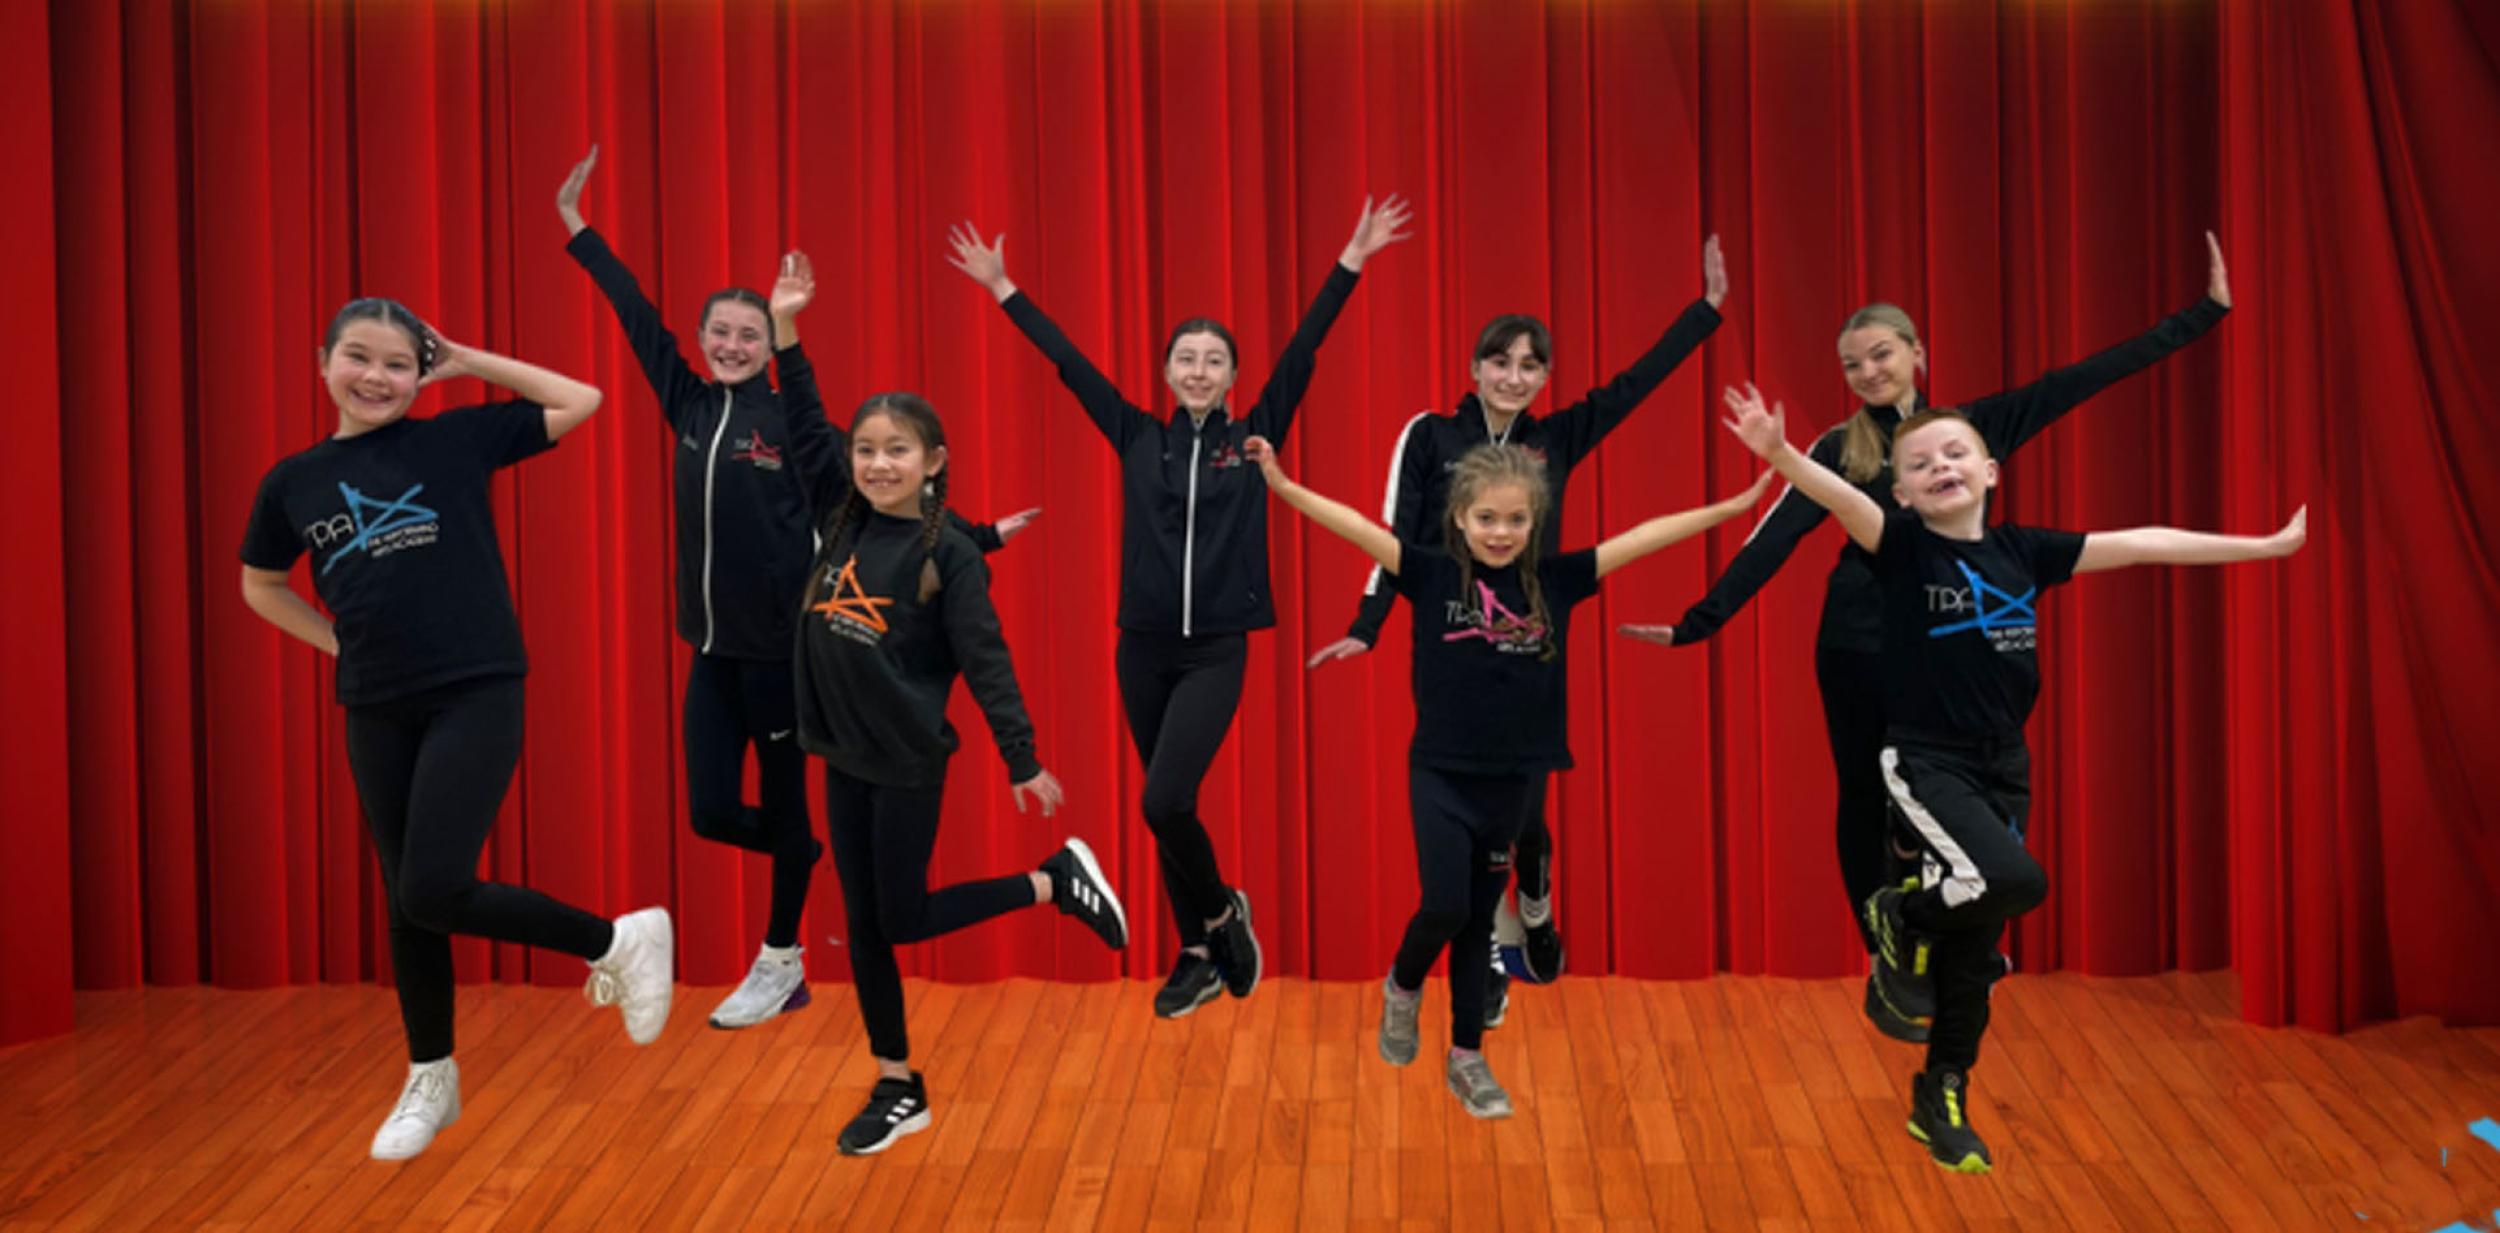 8 young people in black jumping and looking happy in front of a red stage curtain and title High School The Musical Edited